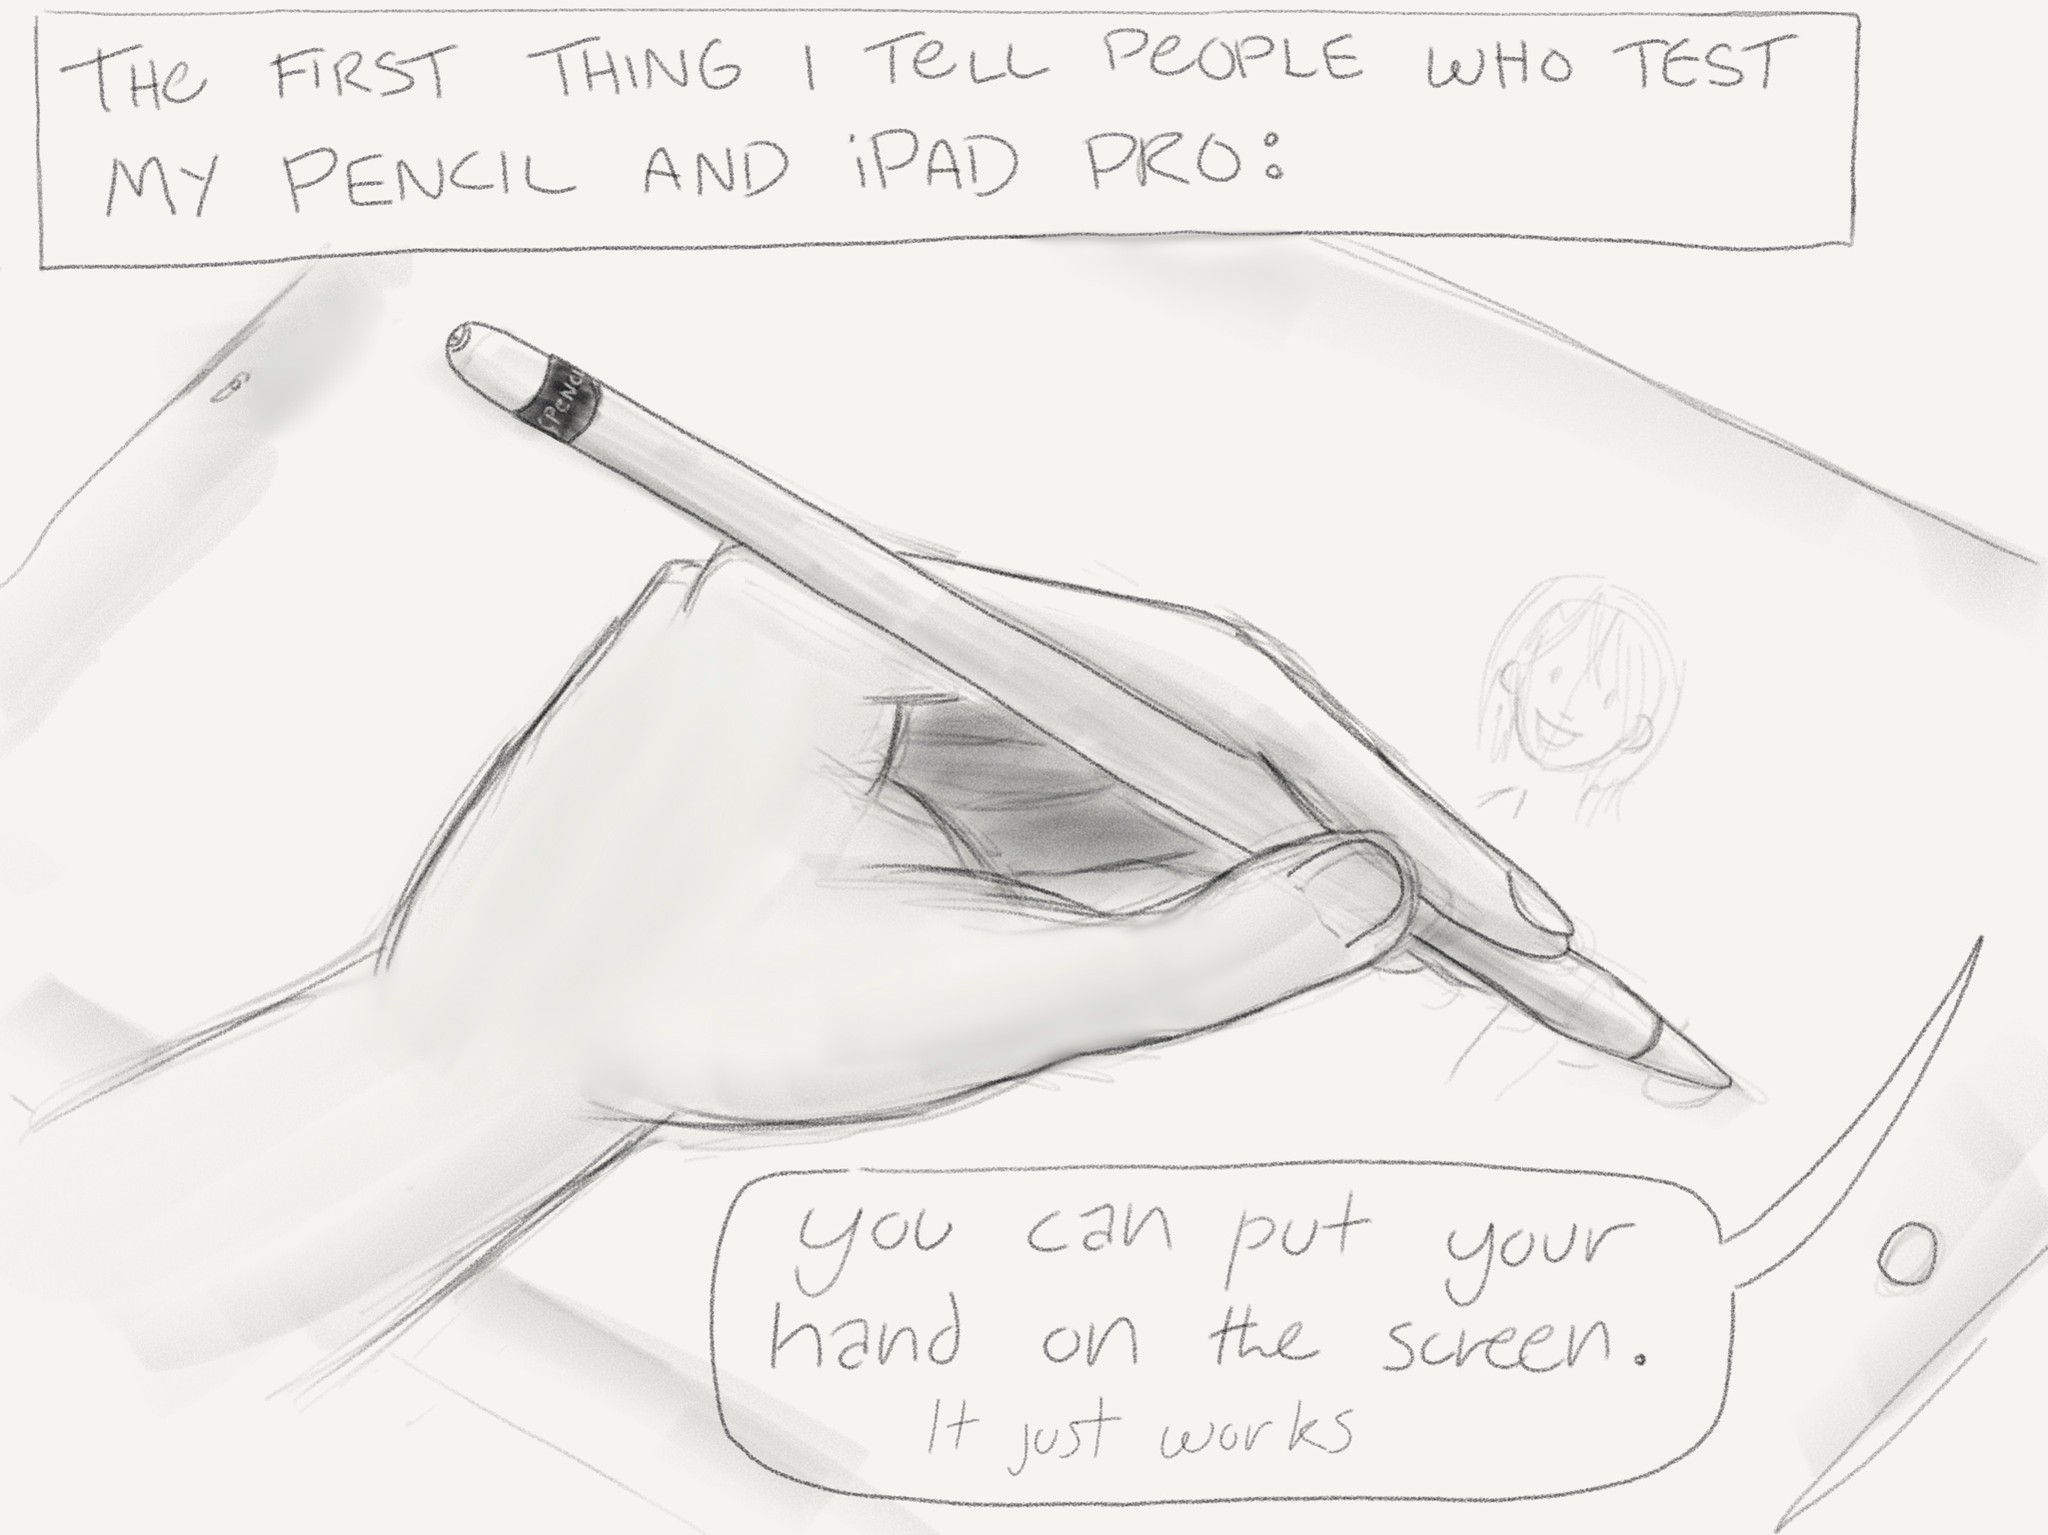 The first thing I tell people who try out my Pencil and iPad Pro: You can put your hand on the screen. It just works.